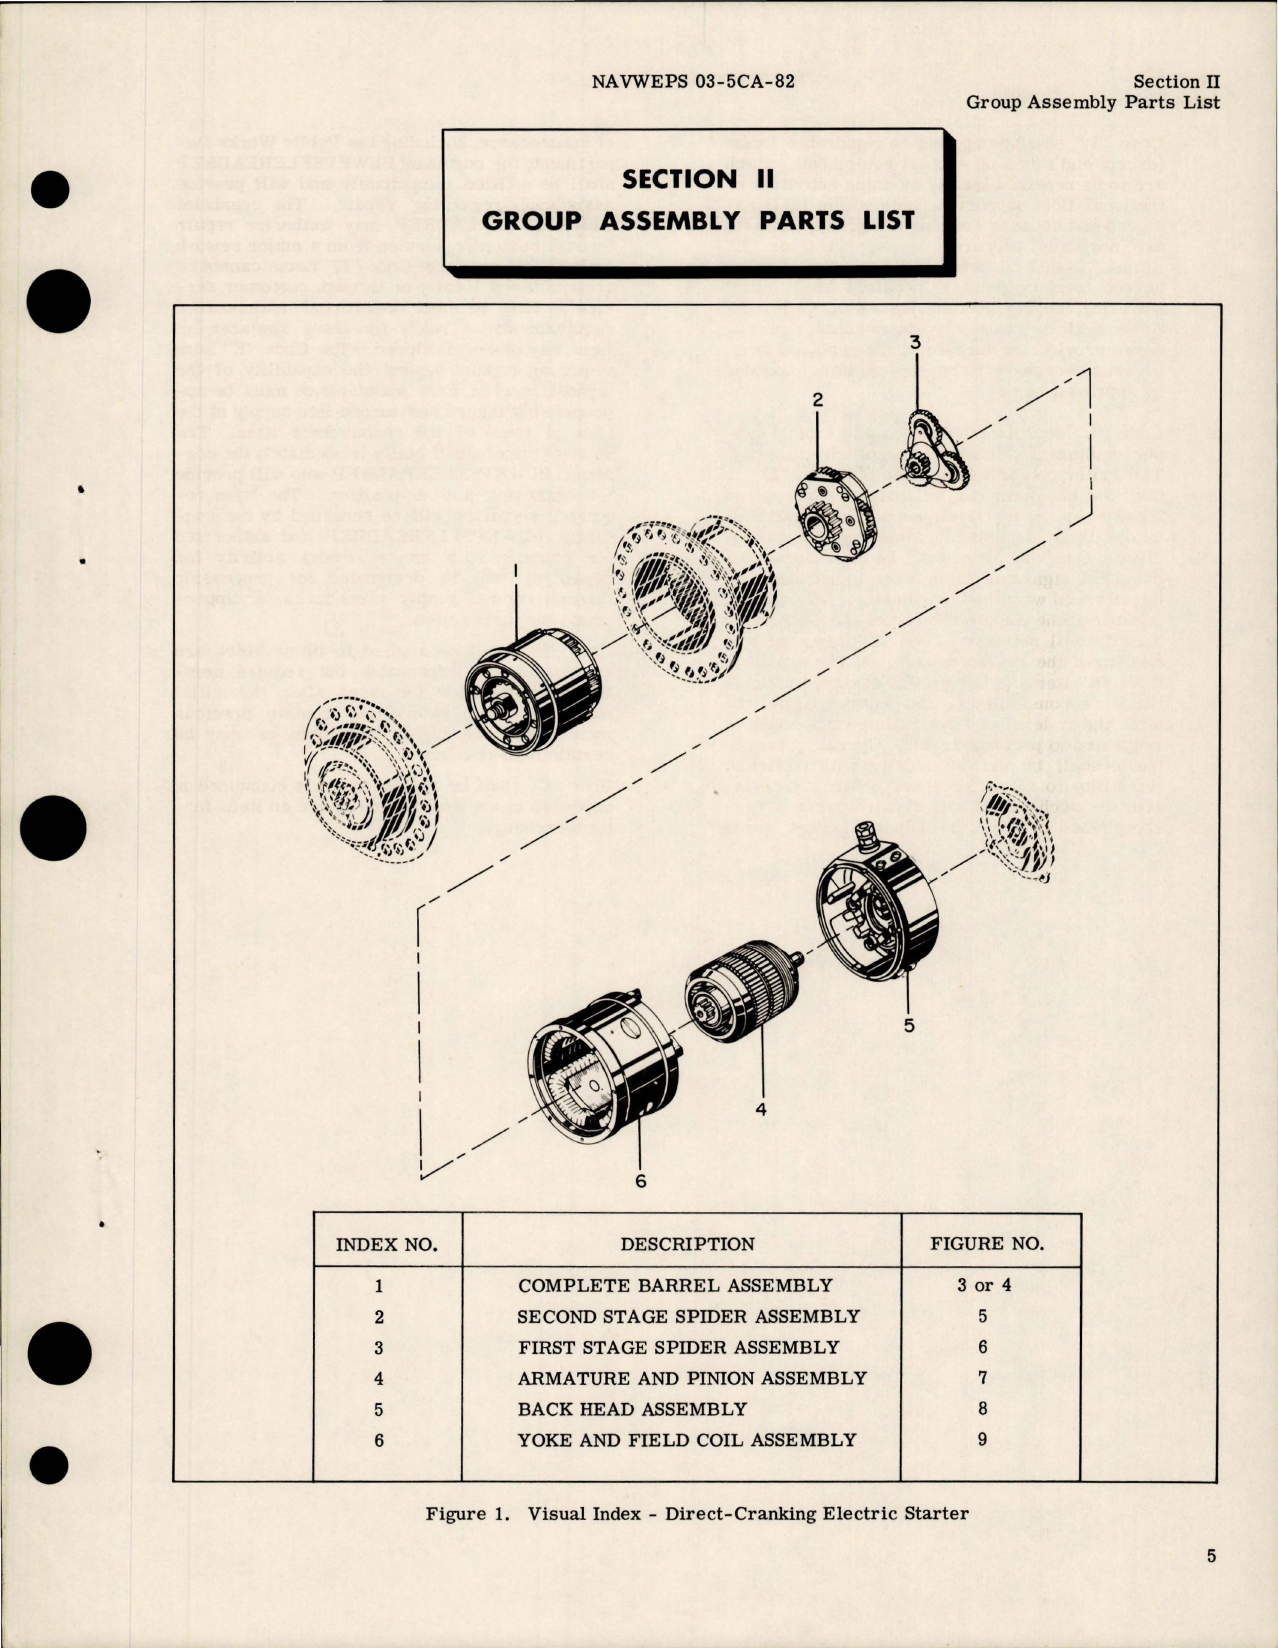 Sample page 7 from AirCorps Library document: Illustrated Parts Breakdown for Direct Cranking Electric Starter - 1416 and 36E00 Series